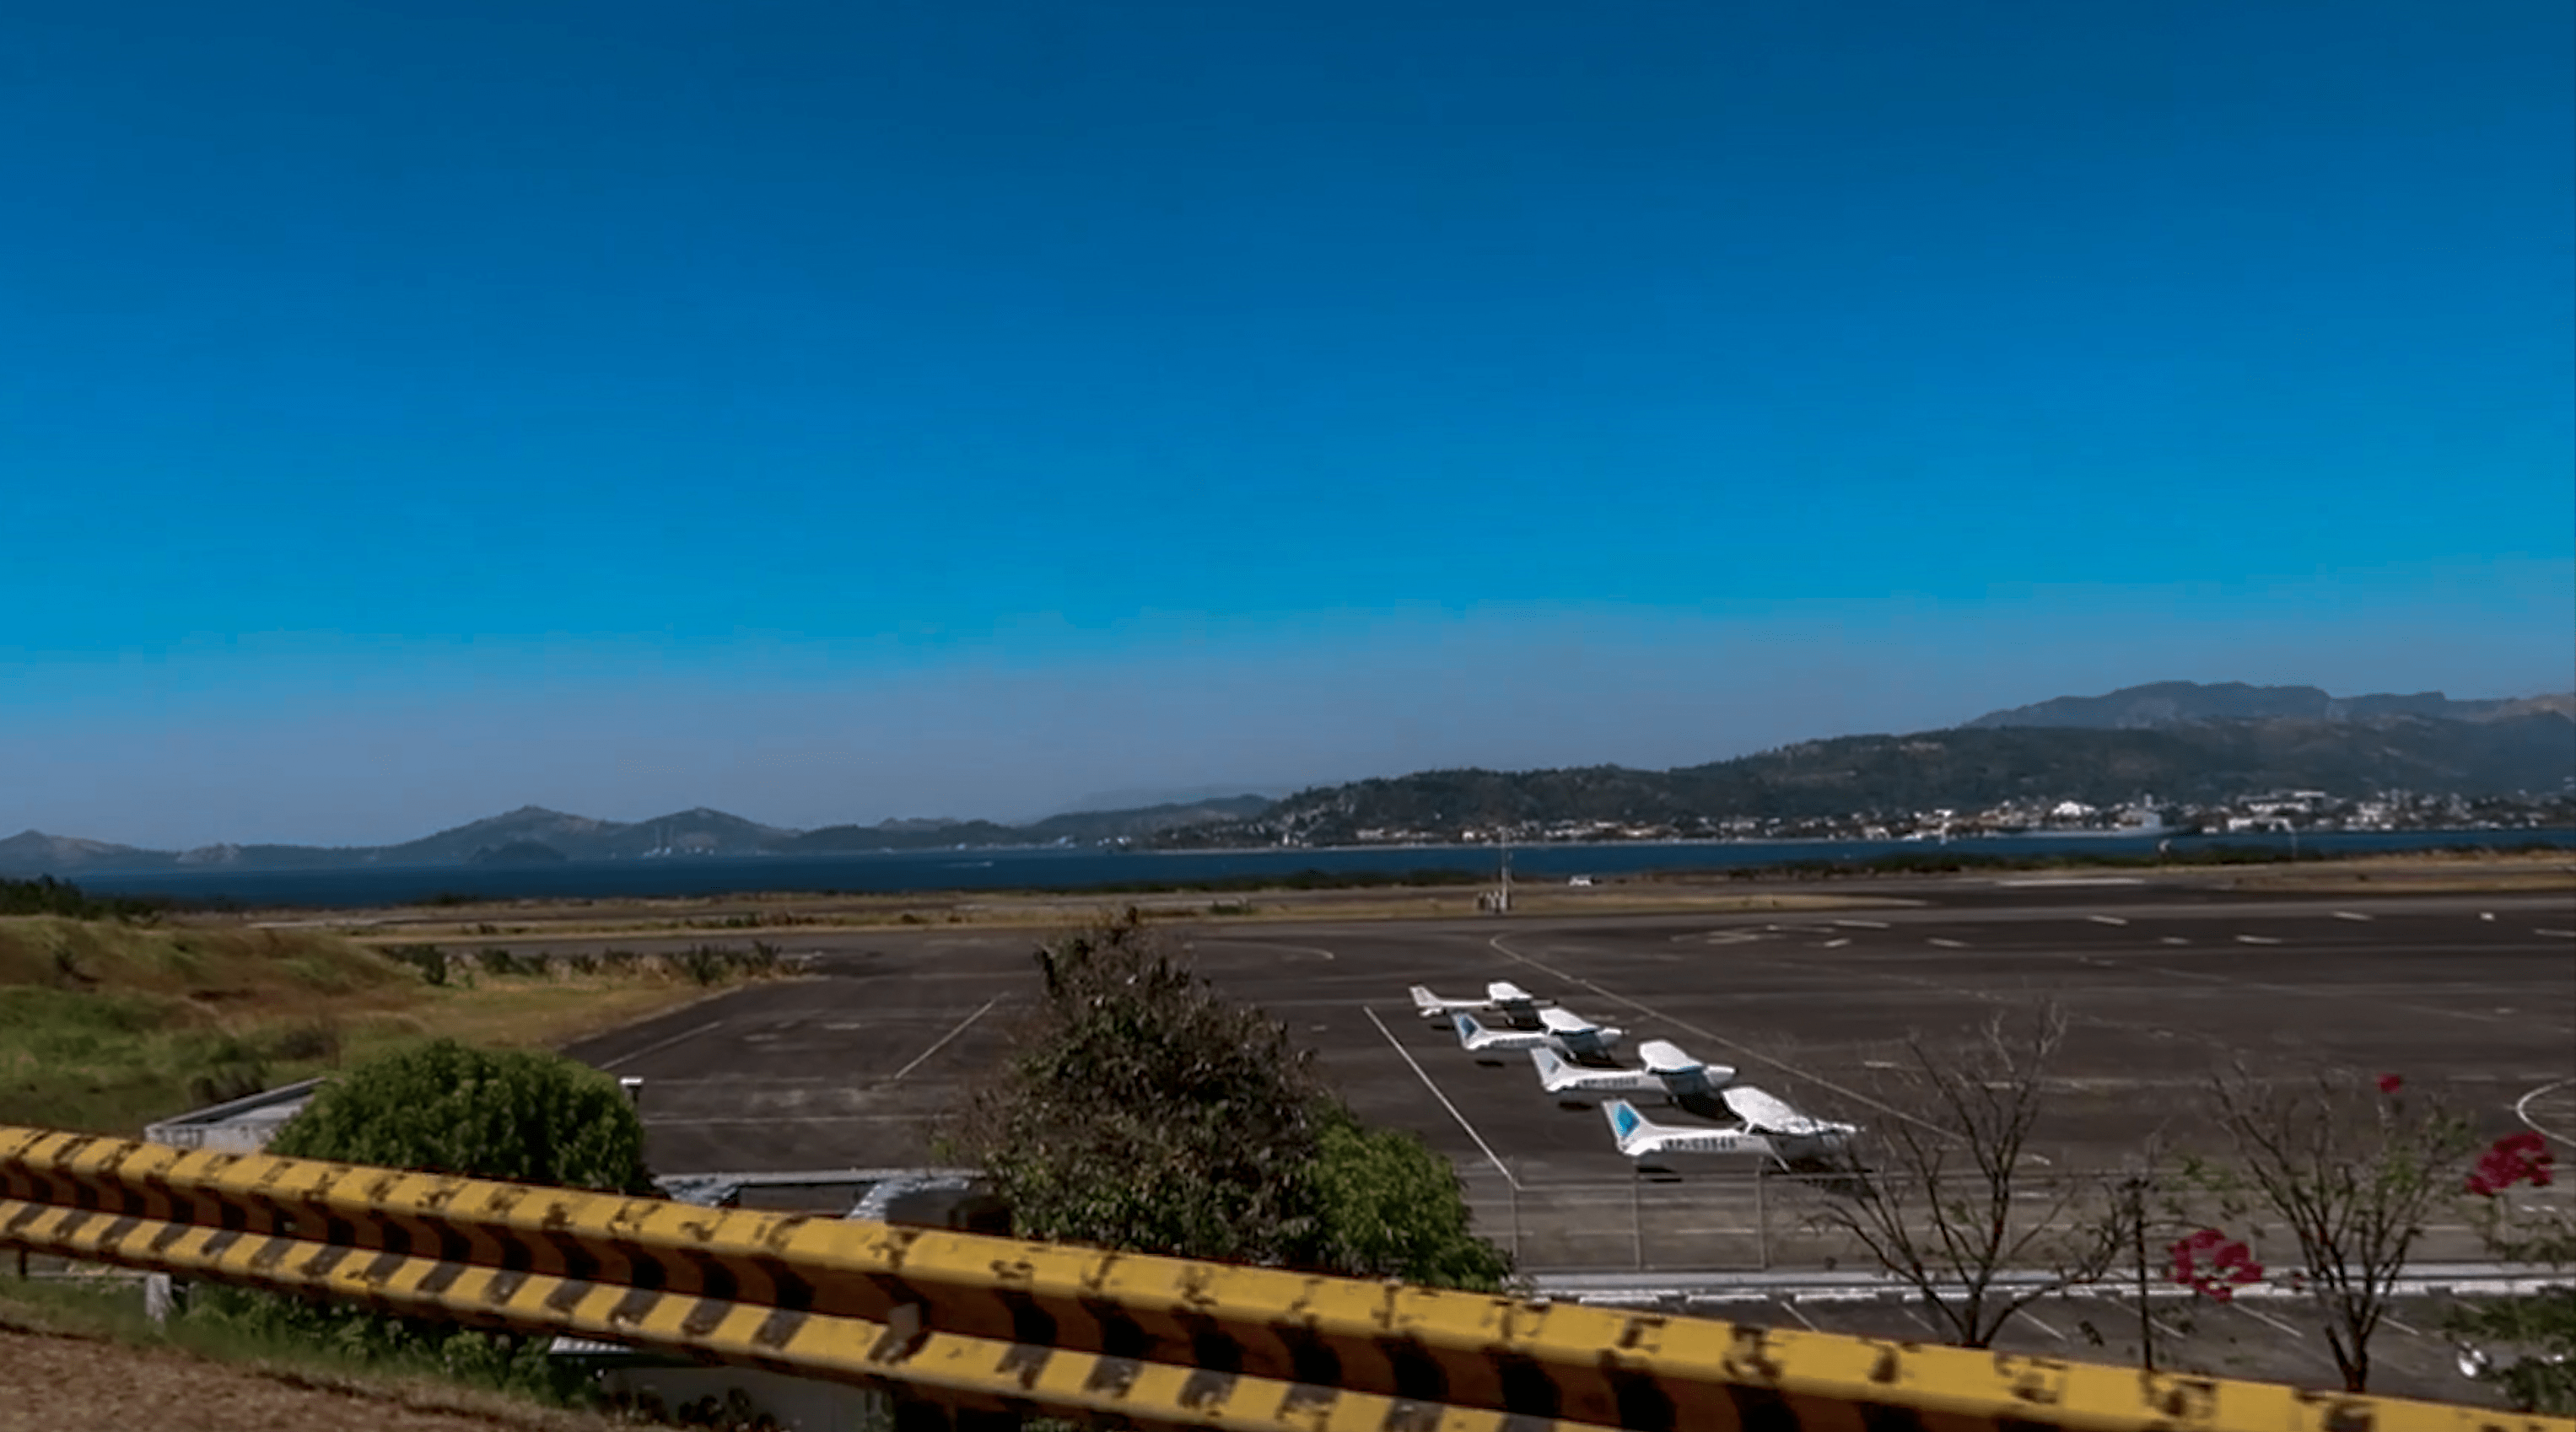 sport planes lined up on air strip in subic bay freeport in zambales philippines